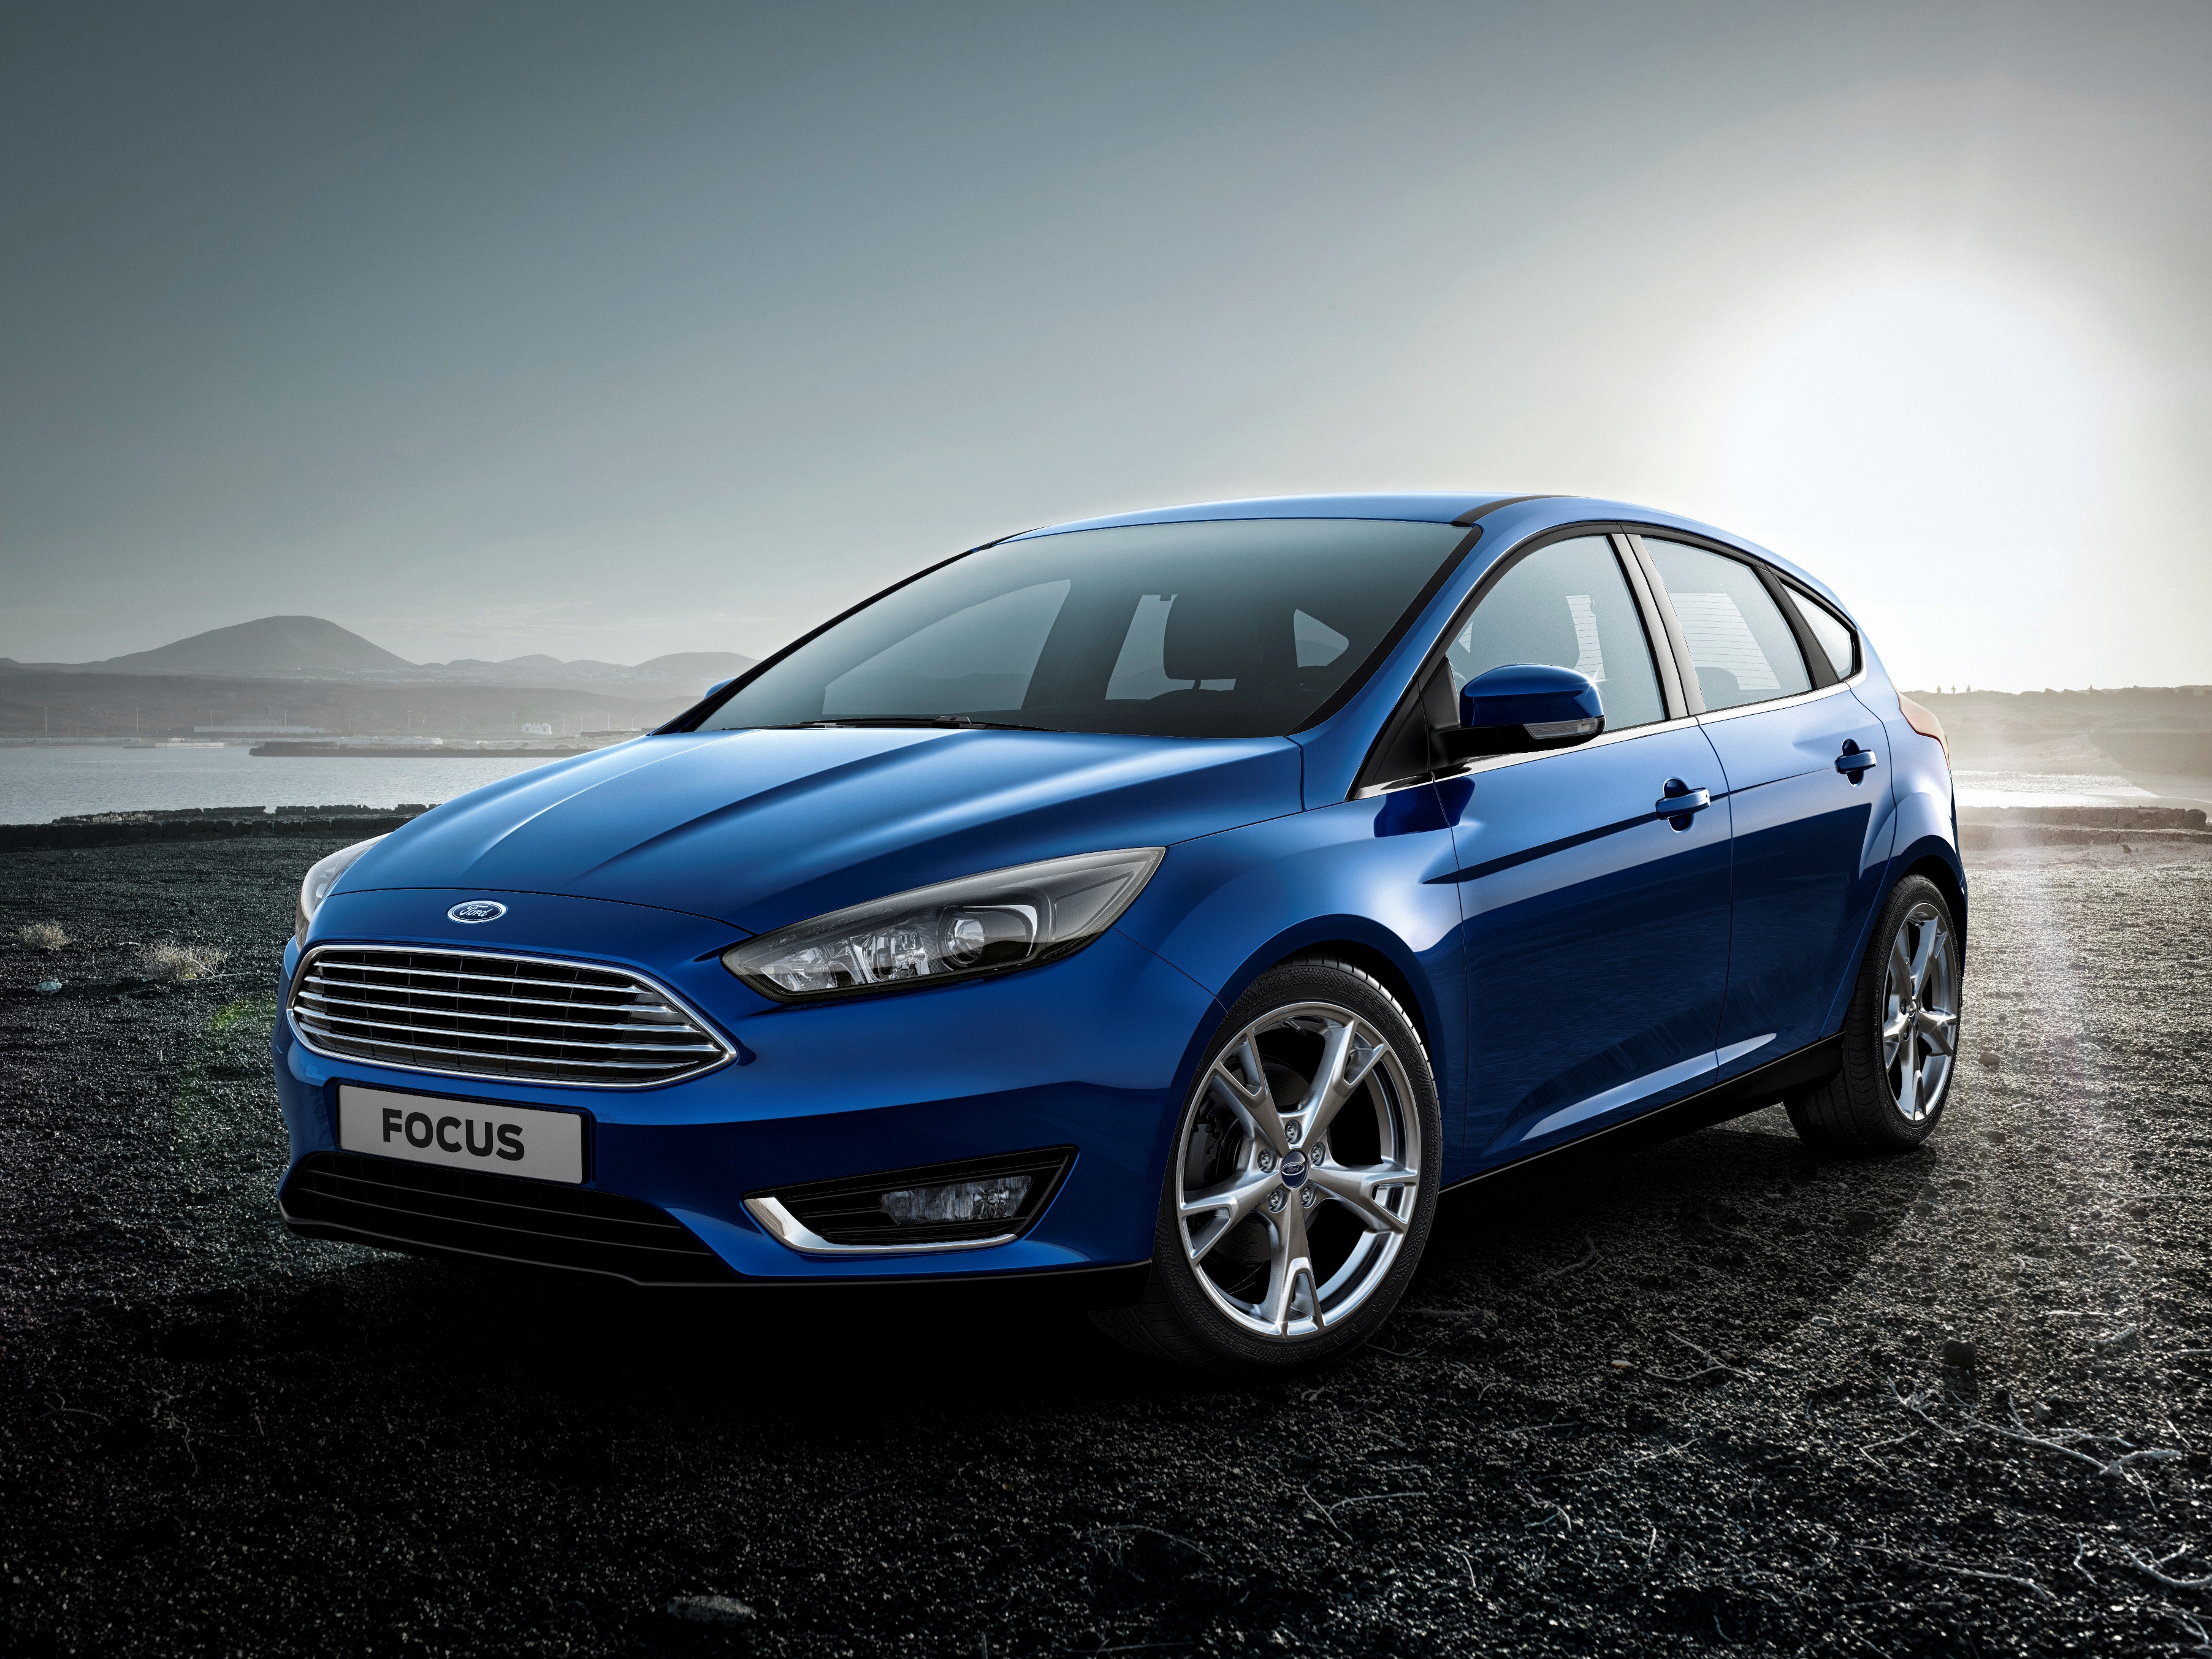 2015 3 4. Ford Focus 2015. Ford Focus 2016. Форд фокус 4. Ford Focus III 2015.